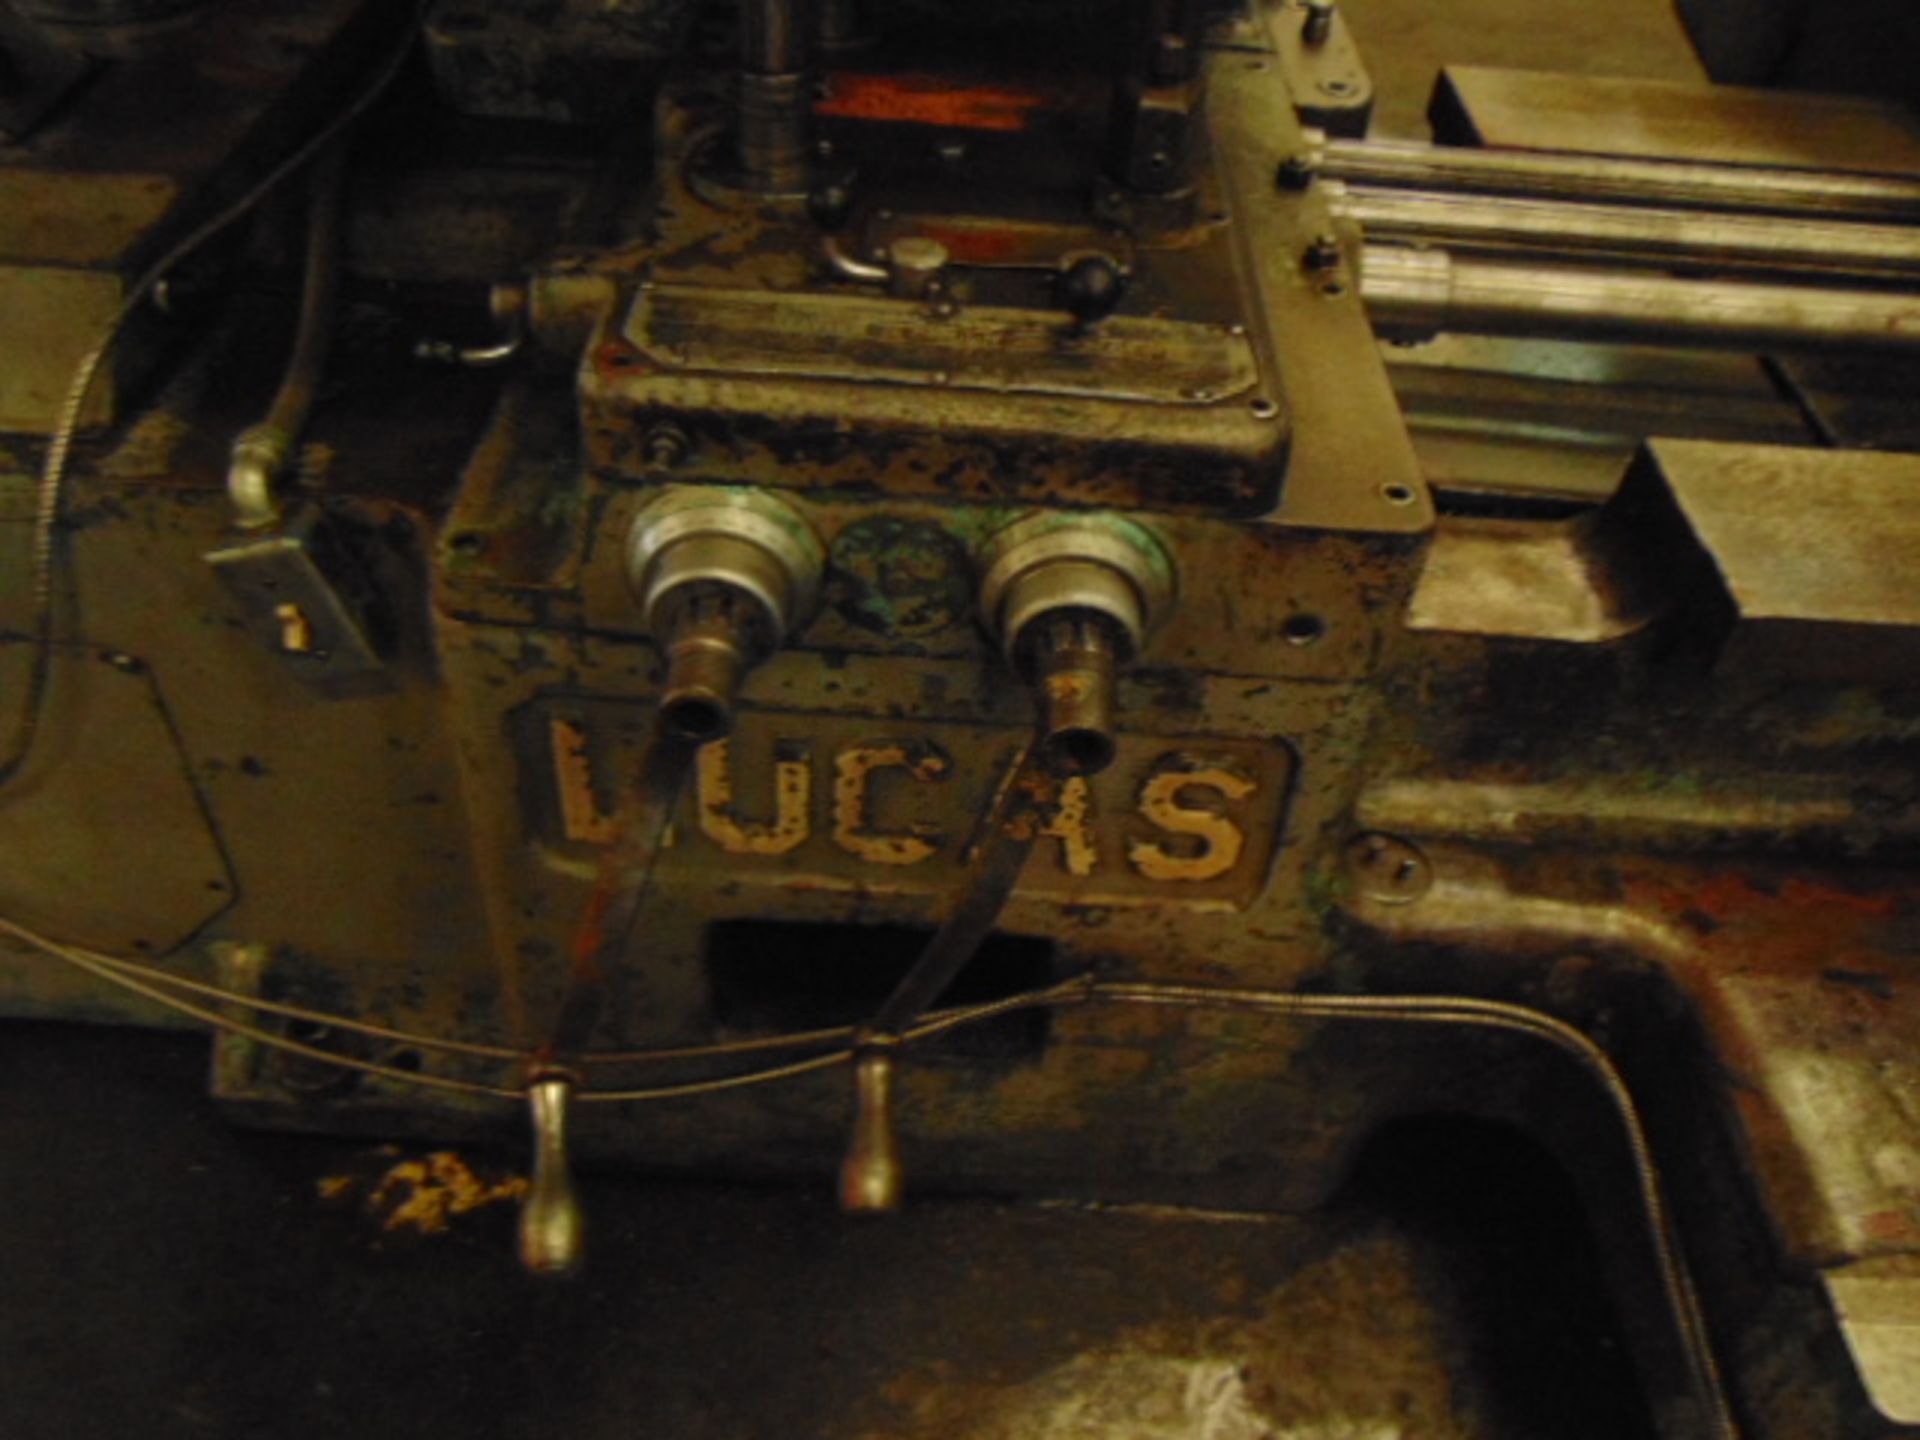 TABLE TYPE HORIZONTAL BORING MILL, LUCAS MDL. 428-60, 40" x 74" tbl., 60" cross travel, approx. - Image 4 of 16